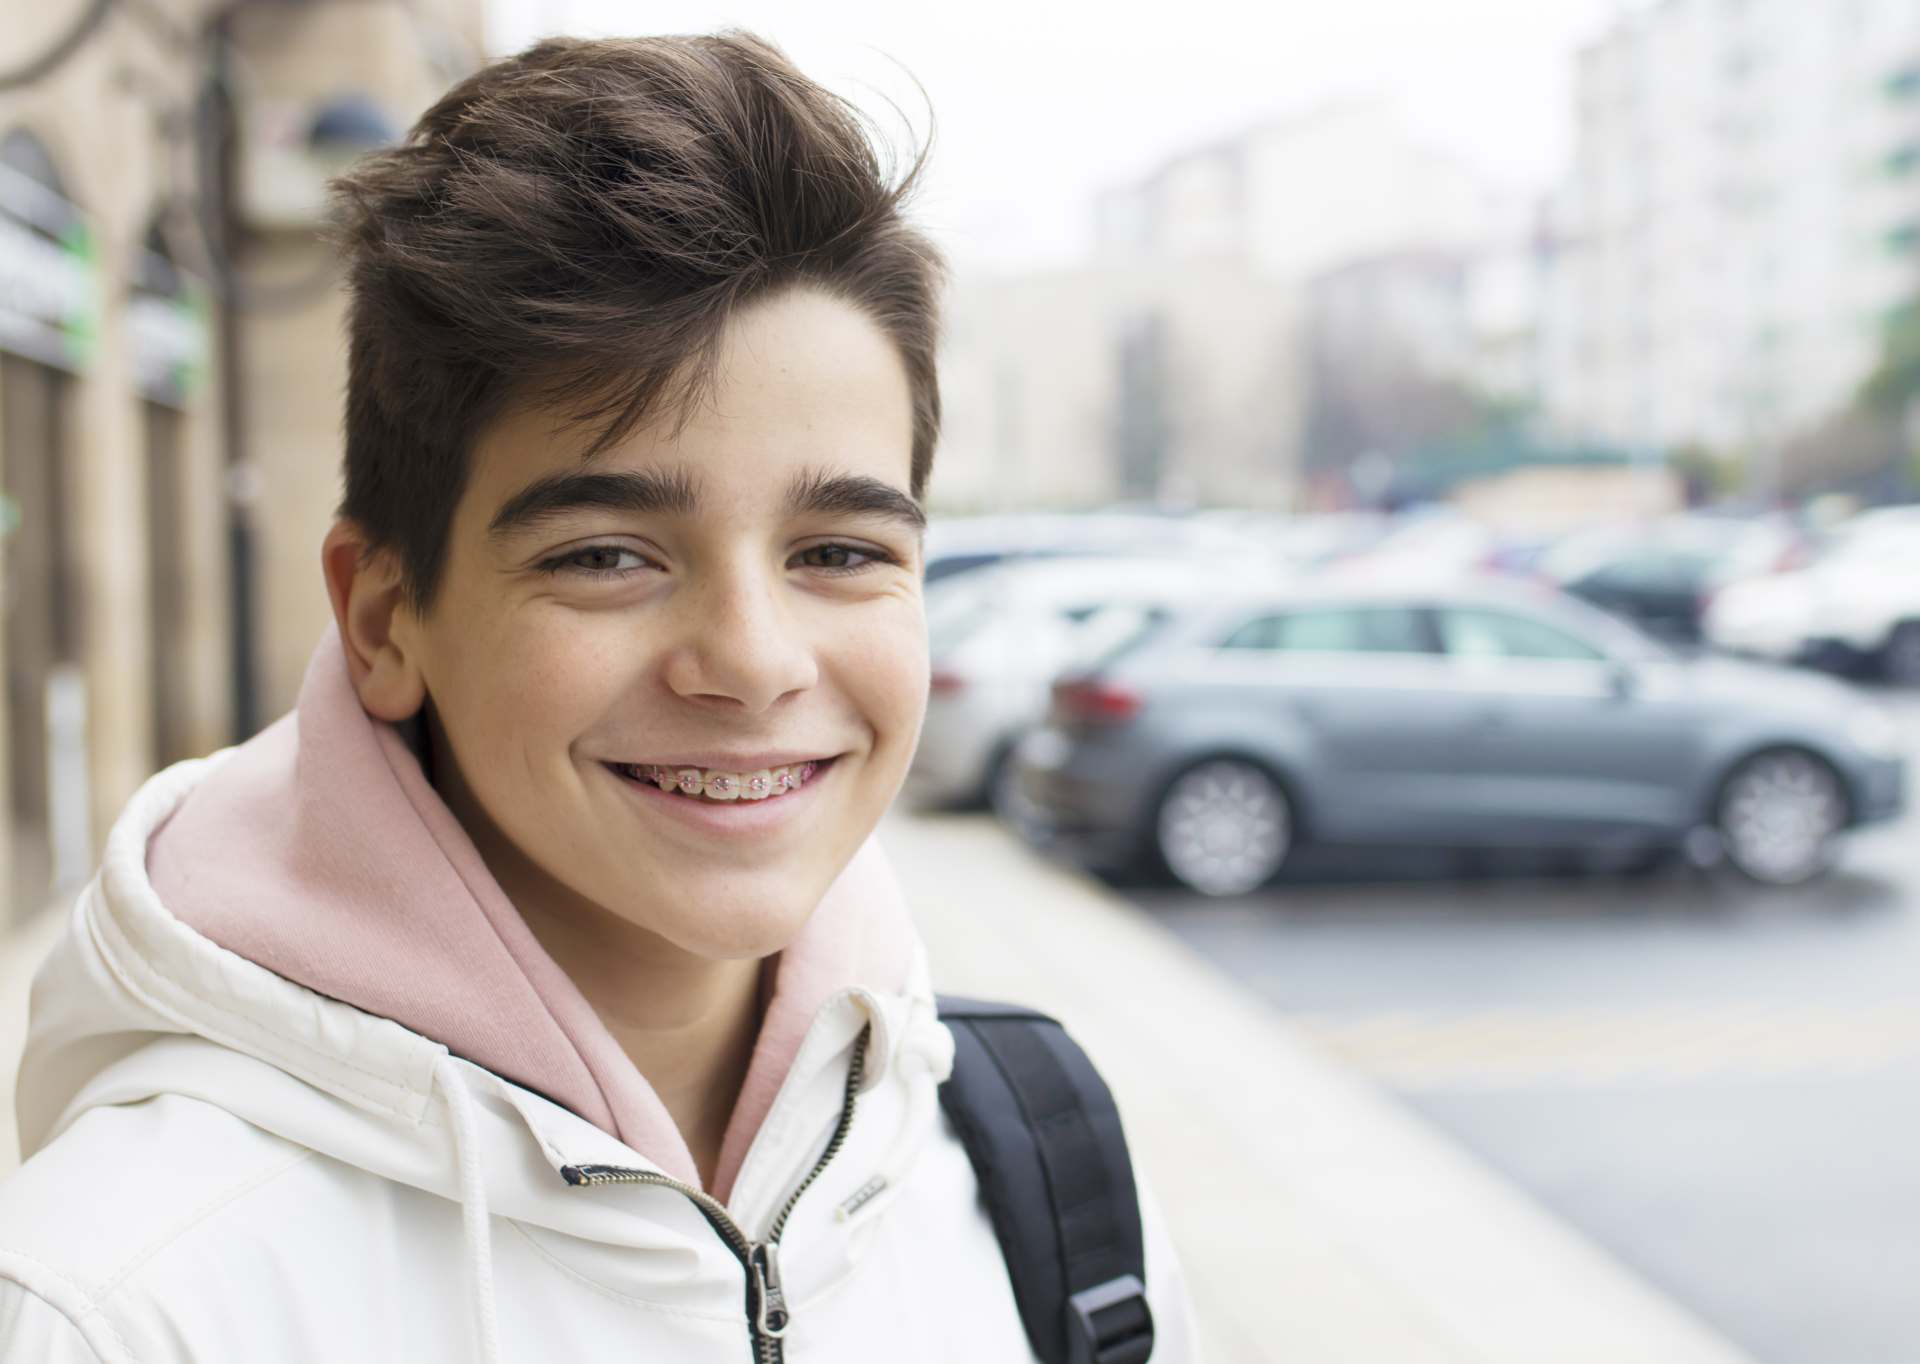 Adolescent boy smiling with pink colored braces on a sidewalk on a cool fall morning